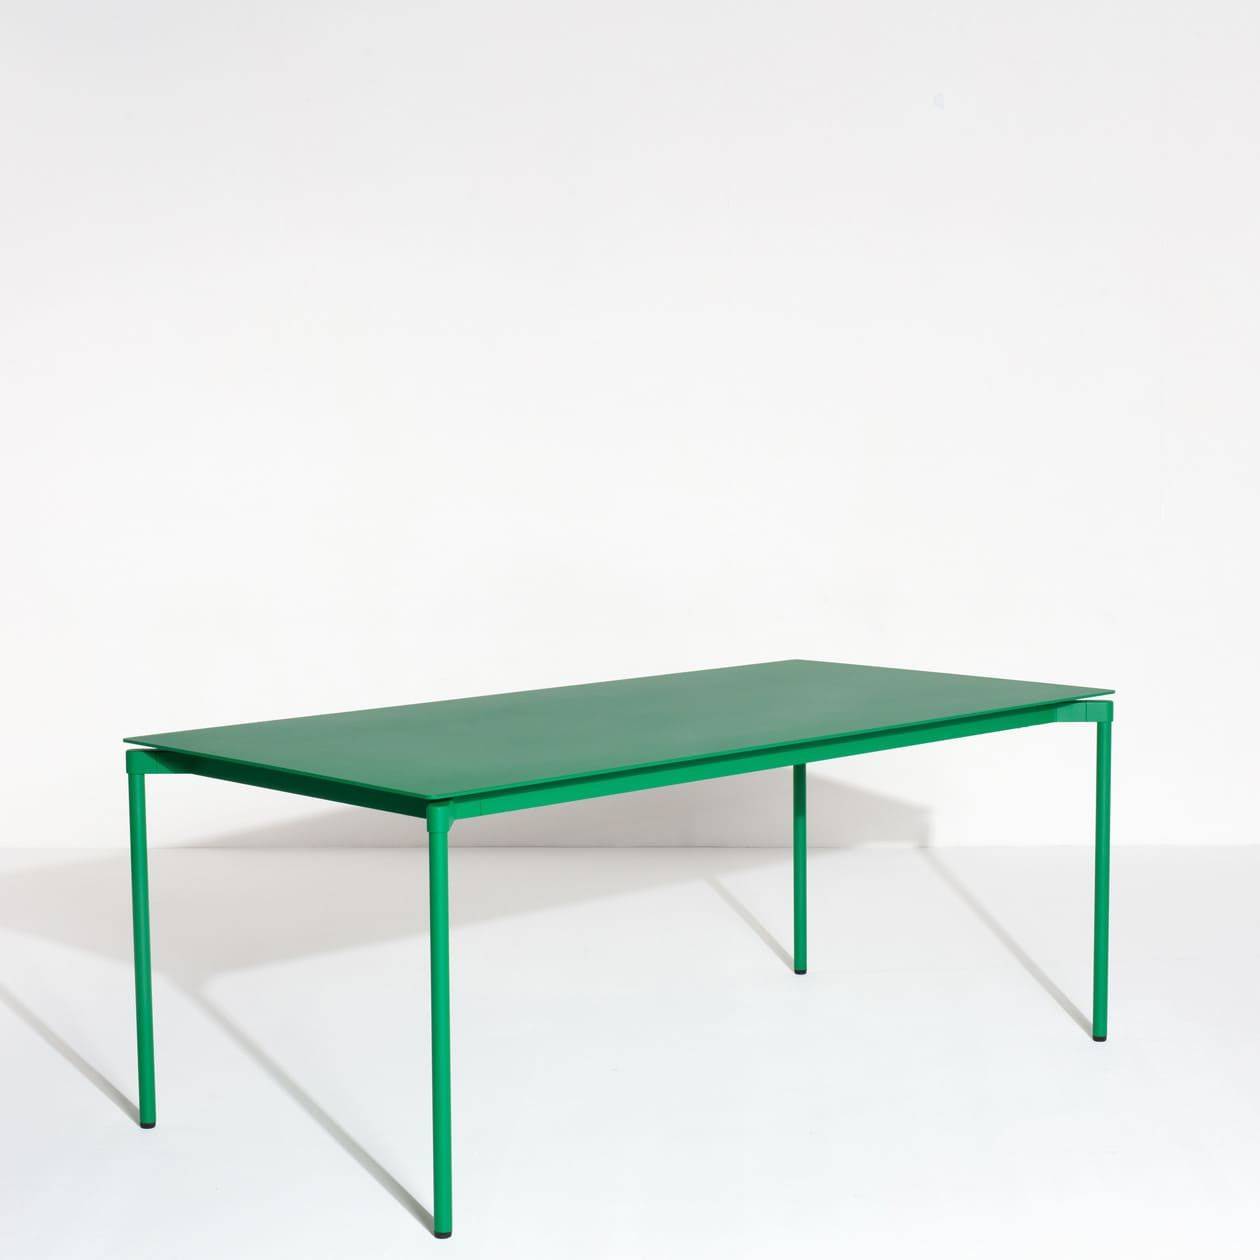 Fromme Rectangular Table - Mint green